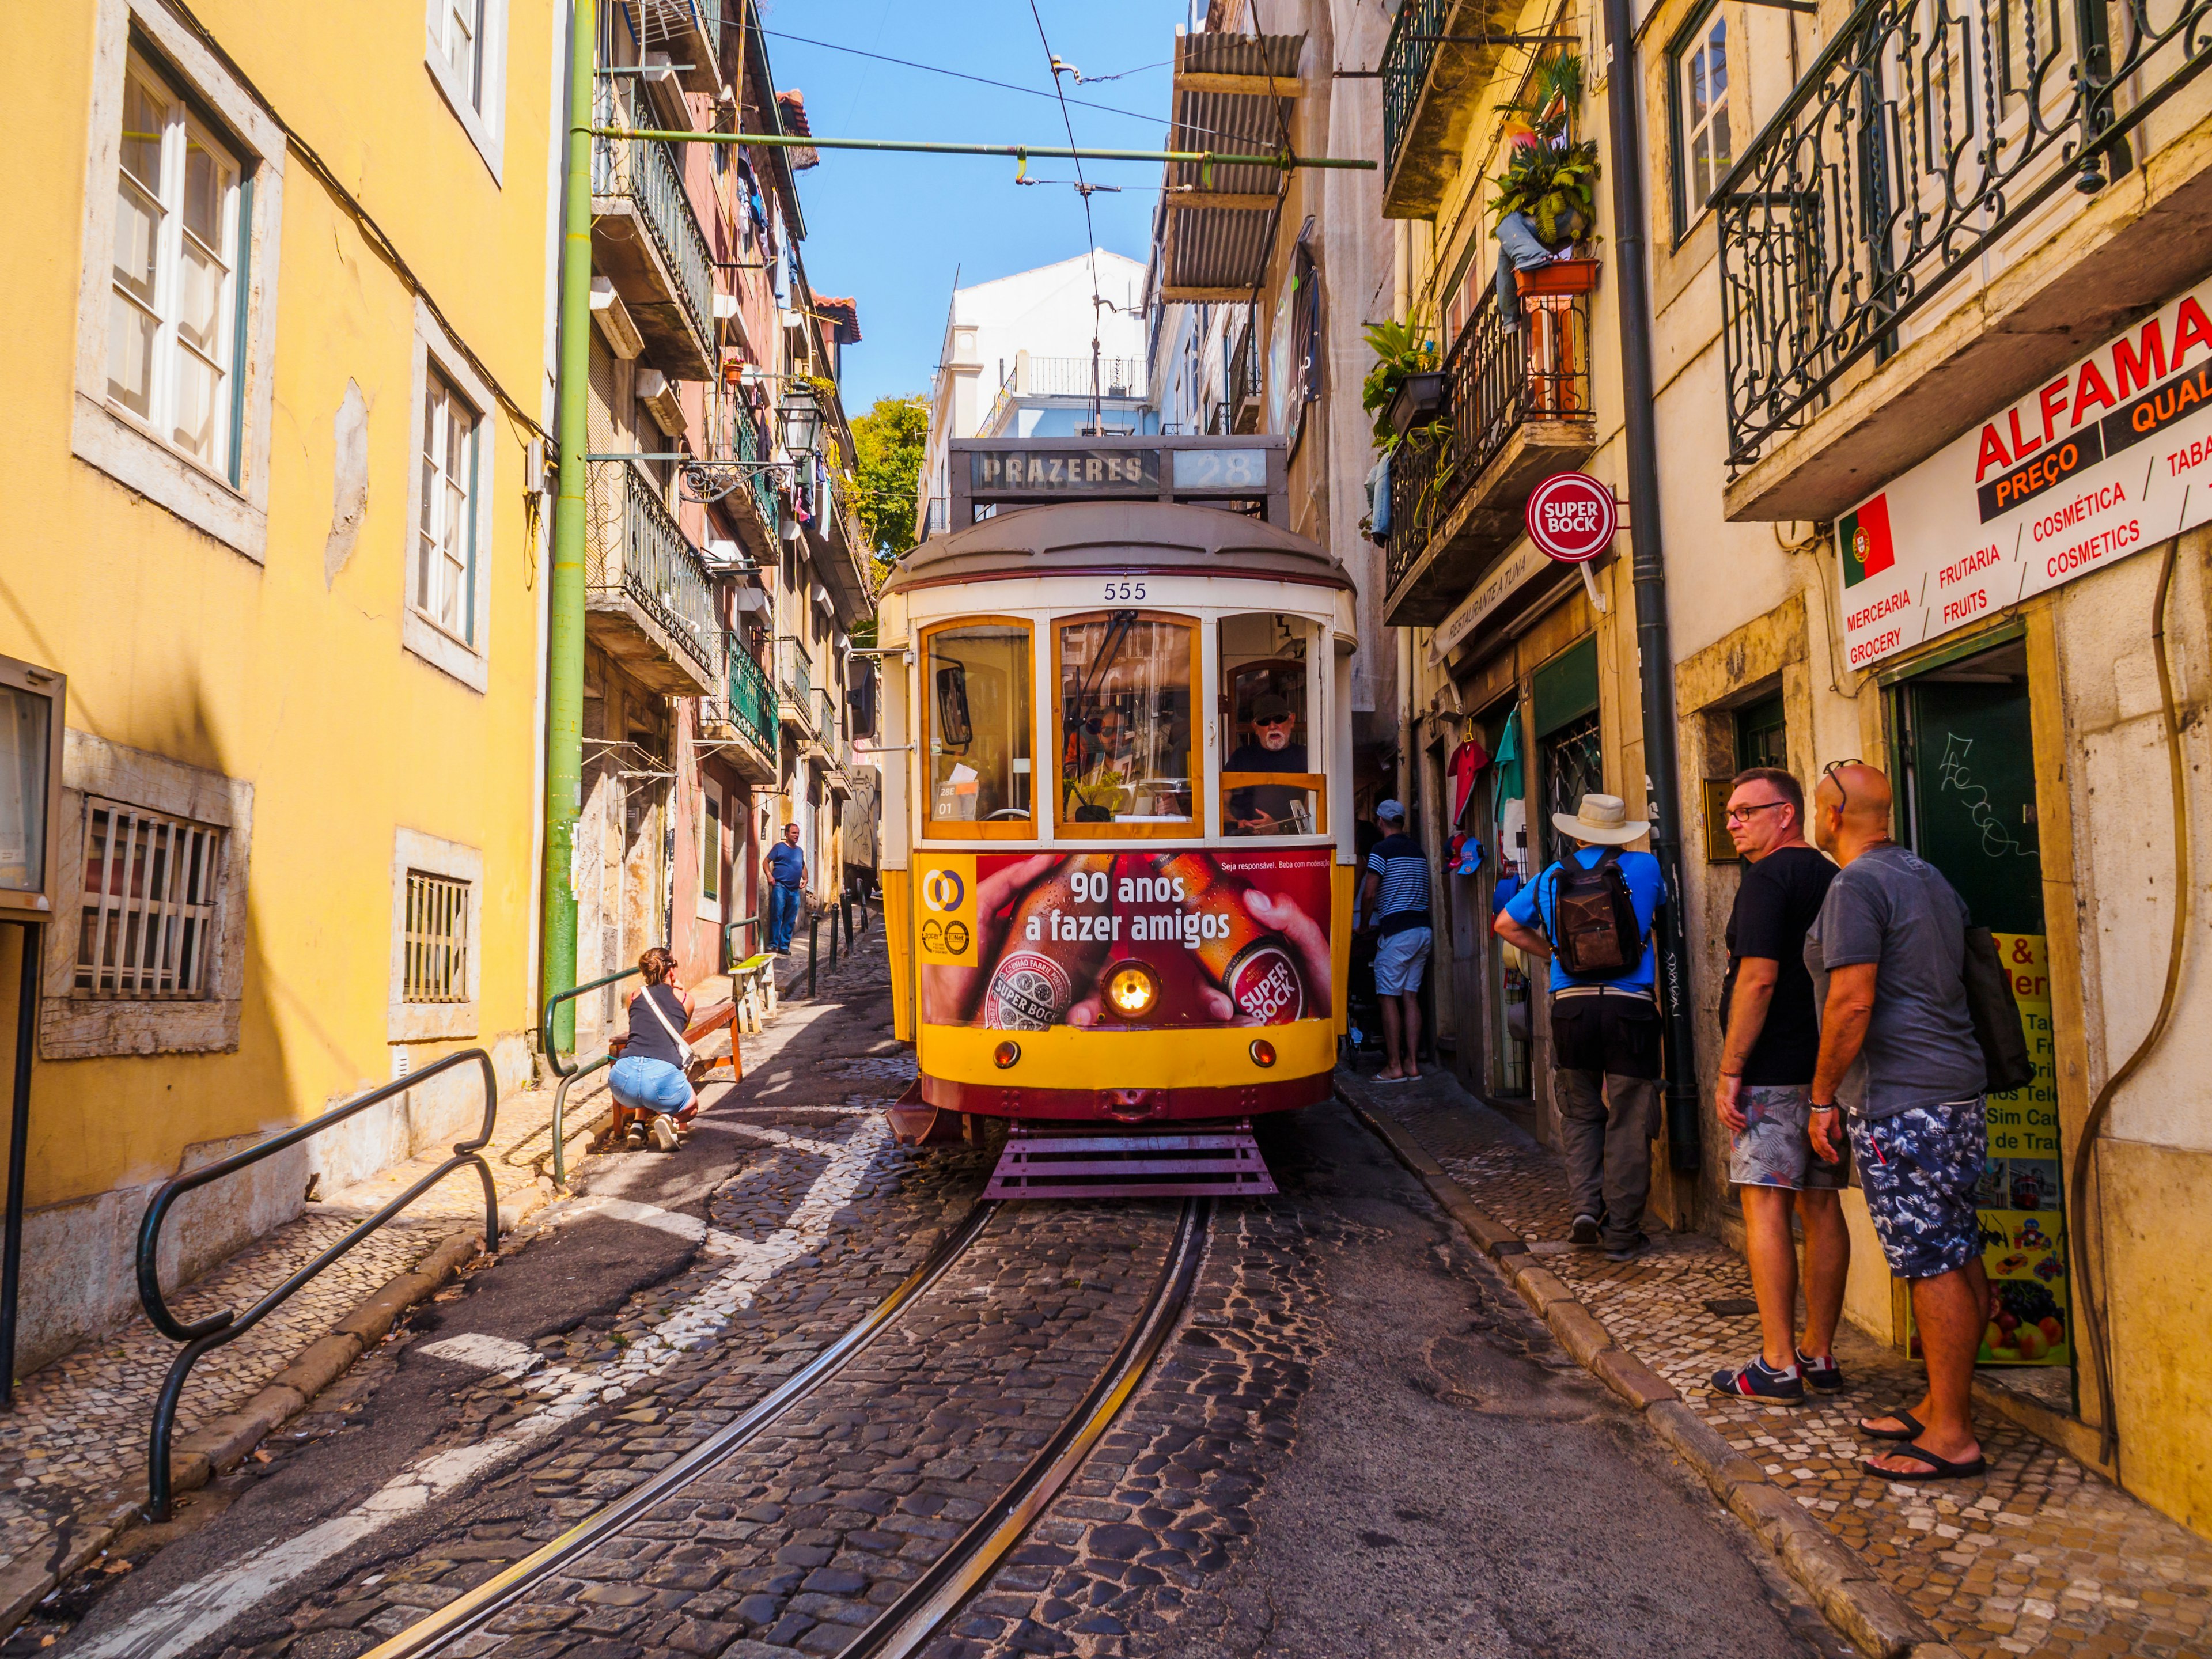 August 22, 2017: People stepping to the sidewalk in order to let the street car pass in the streets of Lisbon.